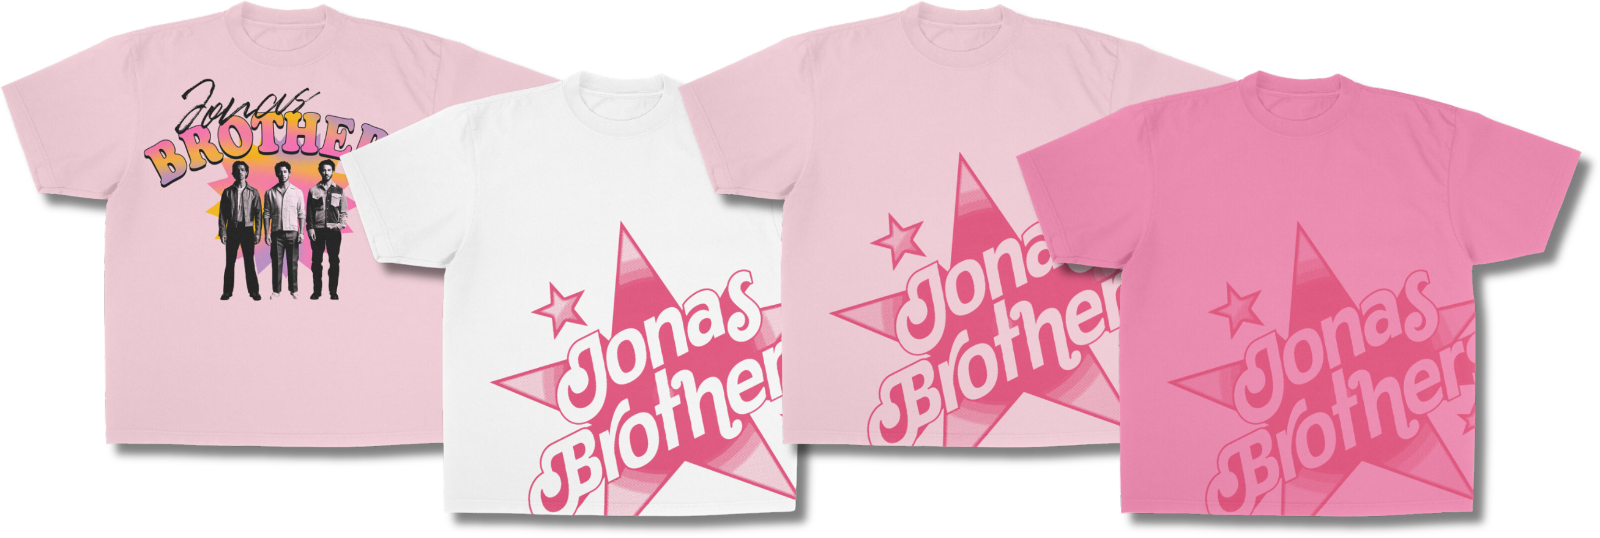 jonas brothers - pink collection